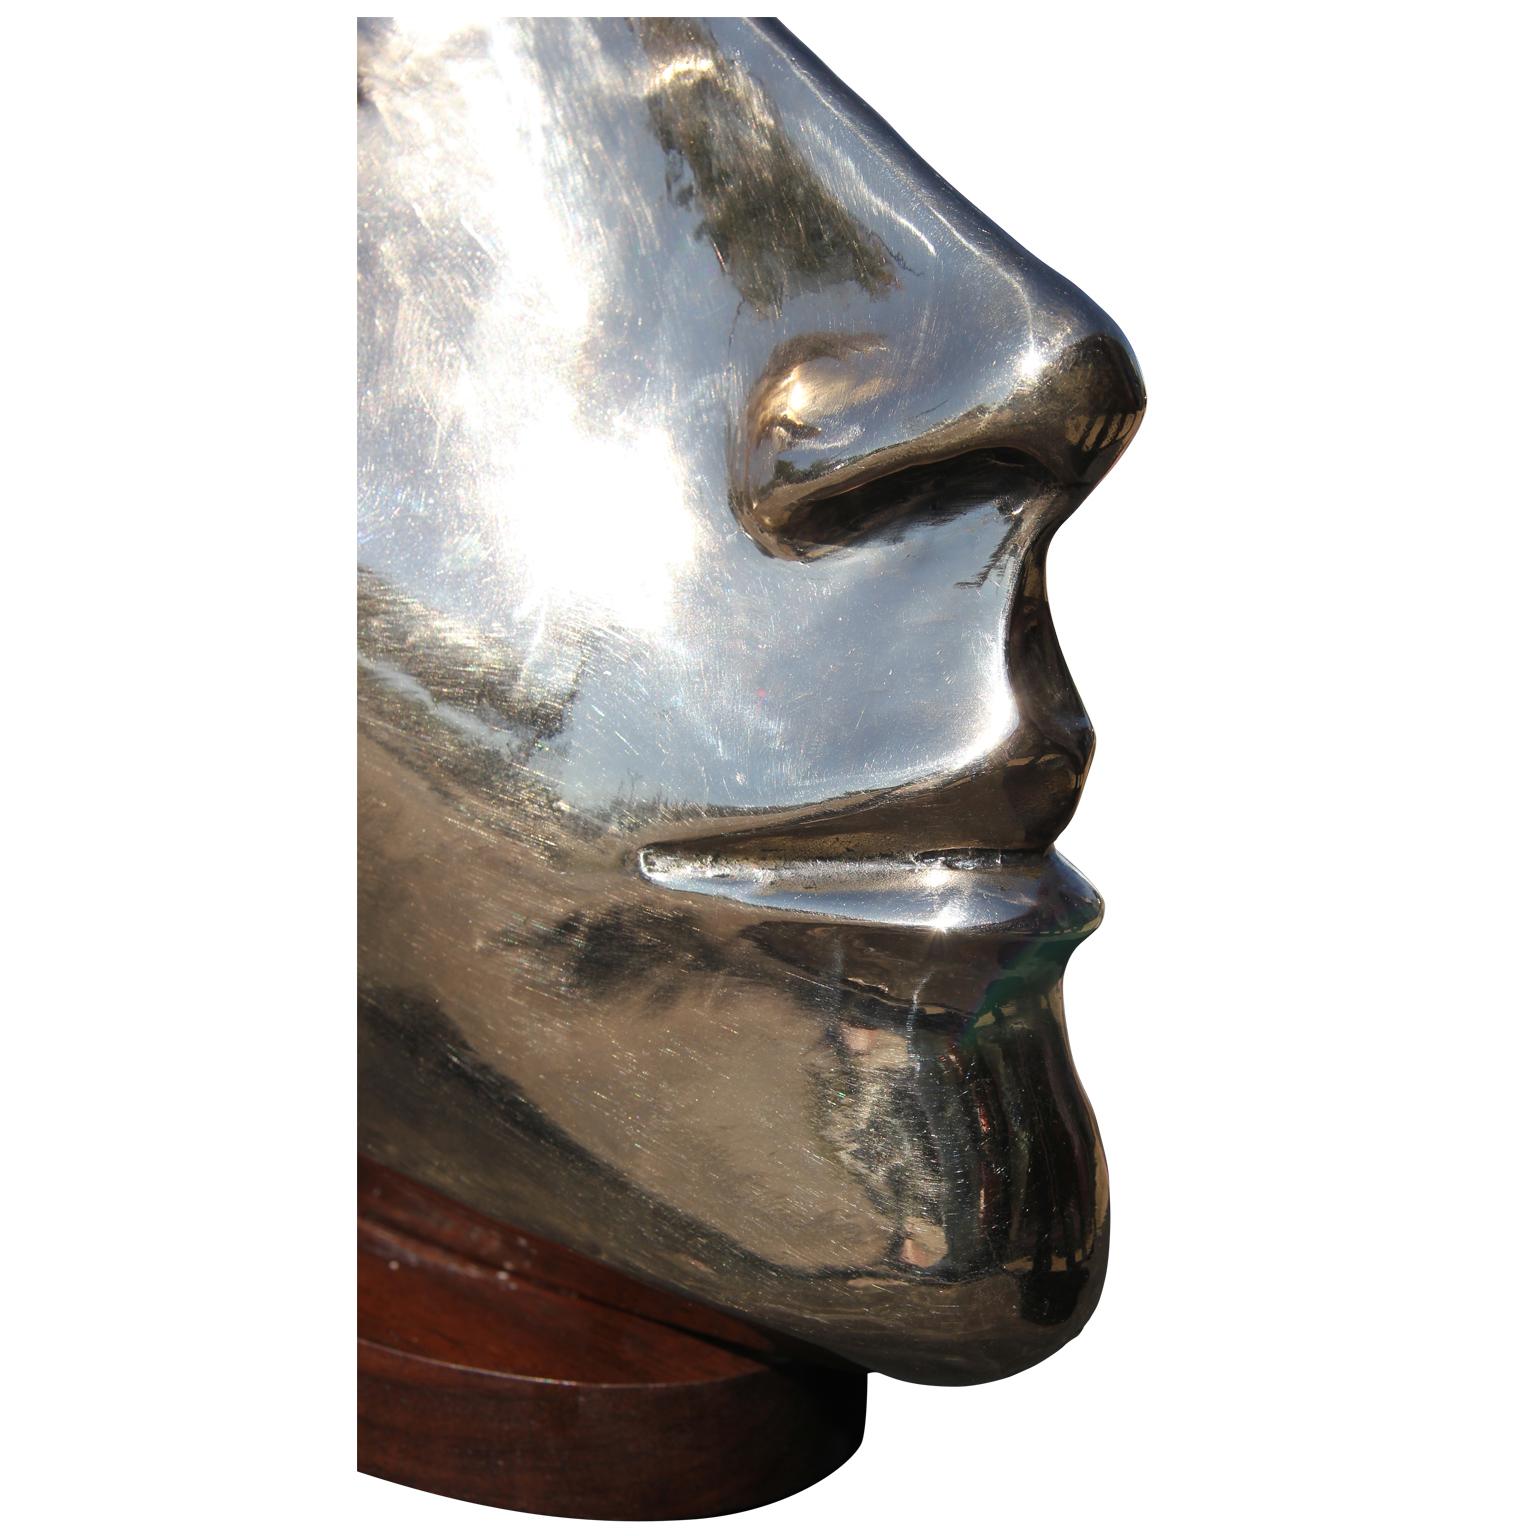 Modern abstract bronze portrait bust sculpture by Houston, Texas artist David Adickes. The work is modeled after Adickes' friend, Julie Burrows, and features sharp facial features and mounted on a wooden base. Signed by artist on the back of the